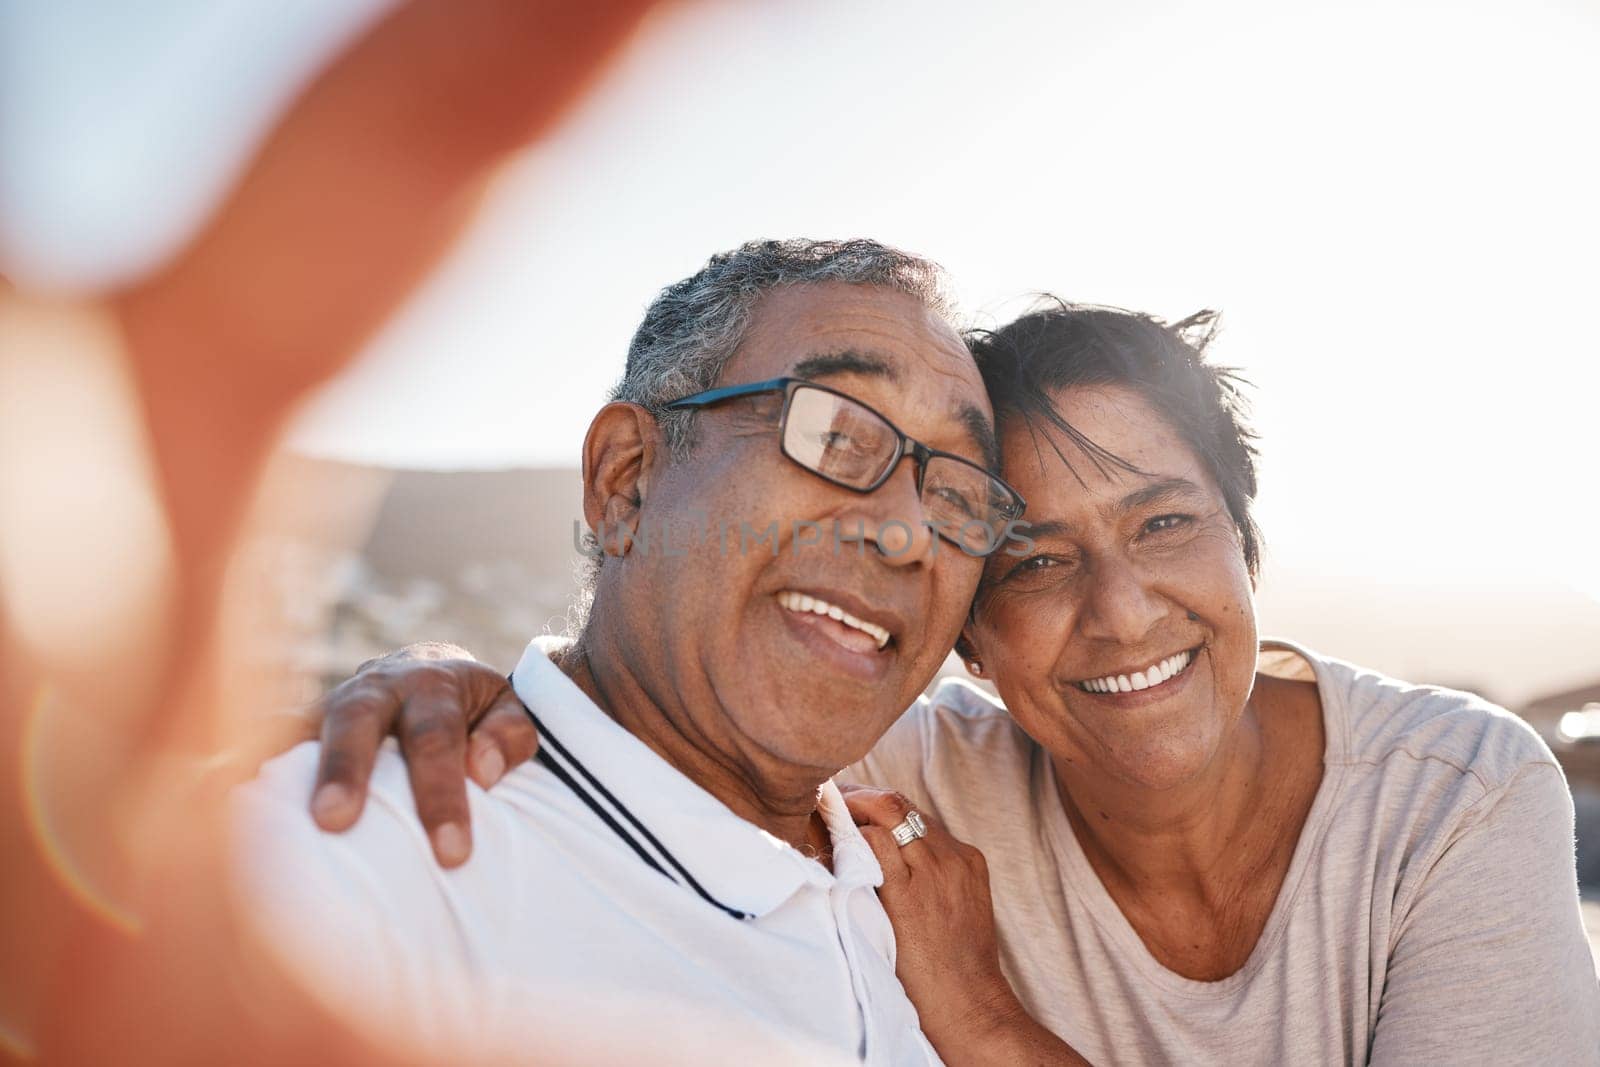 Selfie, romance and a senior couple on the beach together during summer for a retirement holiday or vacation. Portrait, smile or dating with an old husband and wife posing for a photograph by the sea.